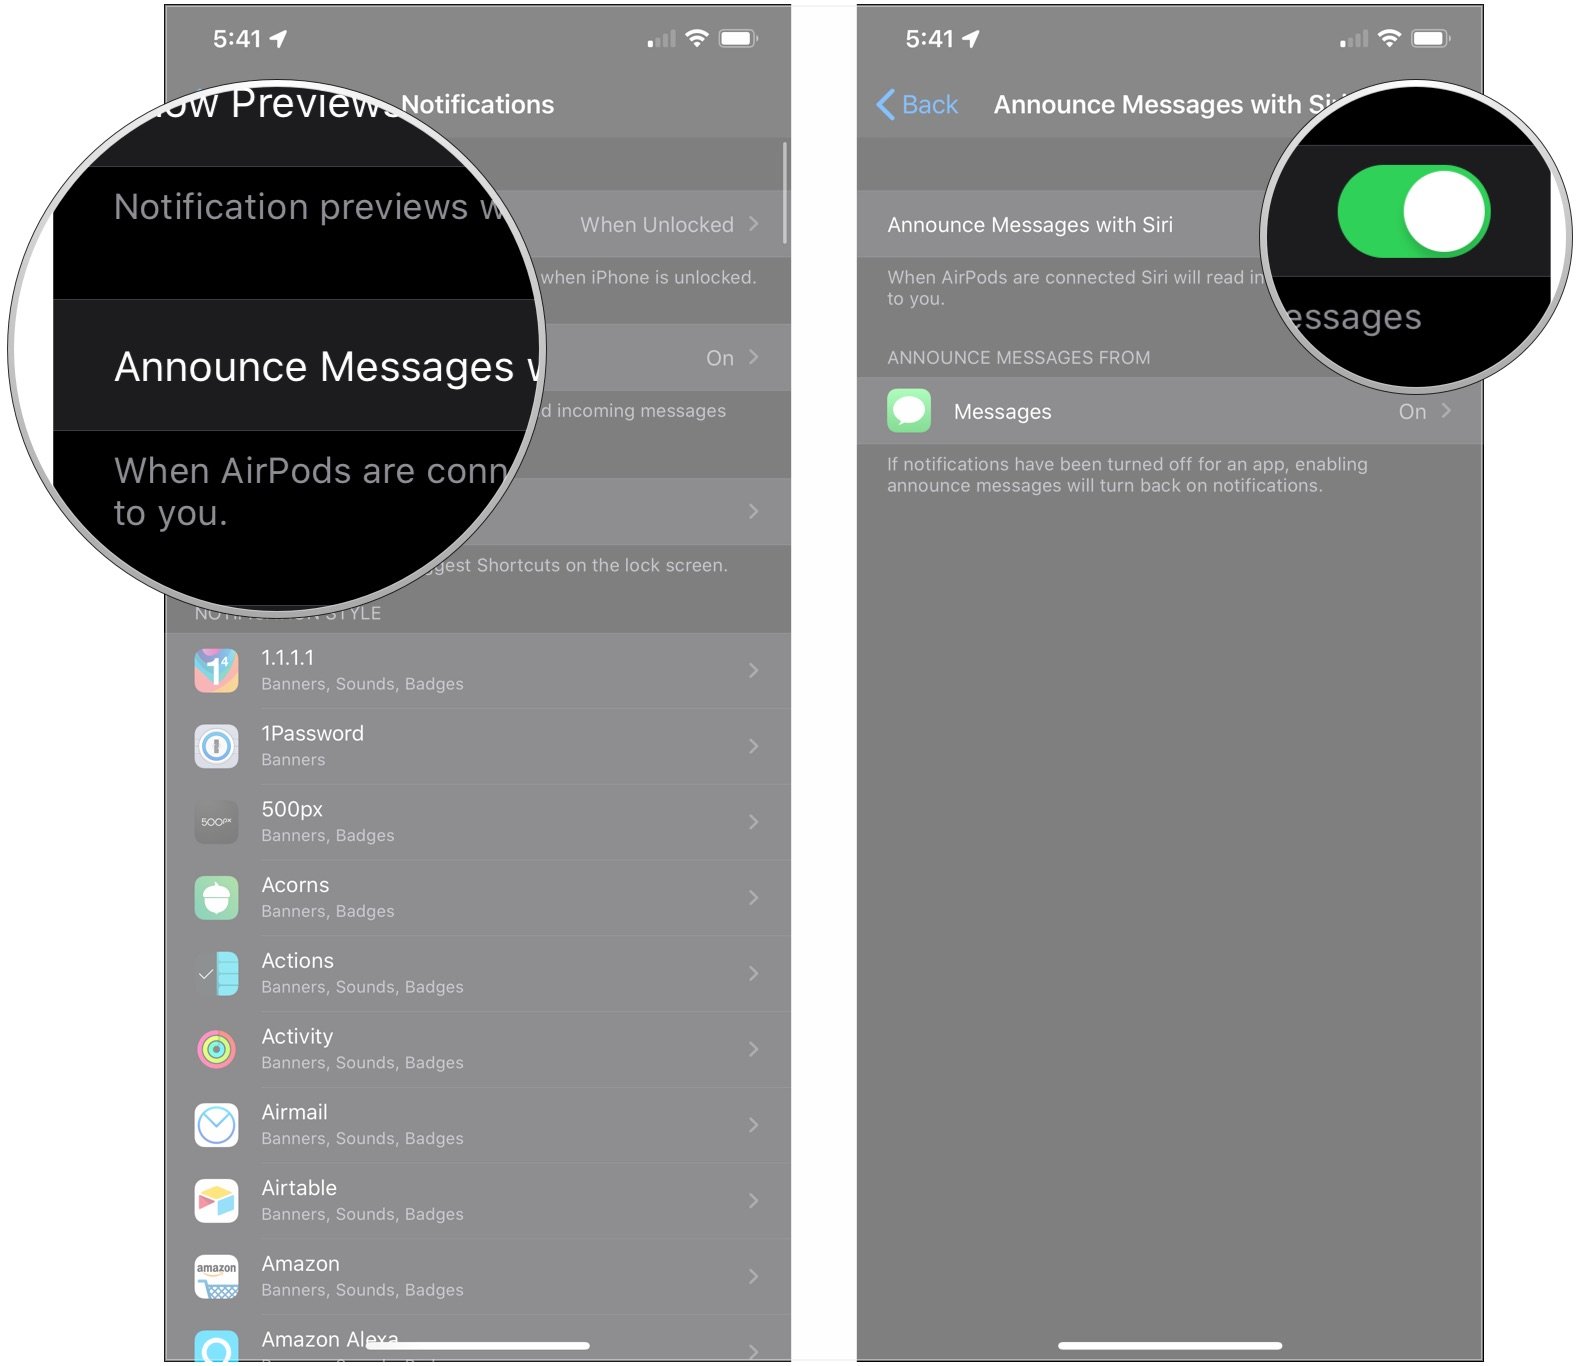 Tap Announce Messages with Siri, tap the switch